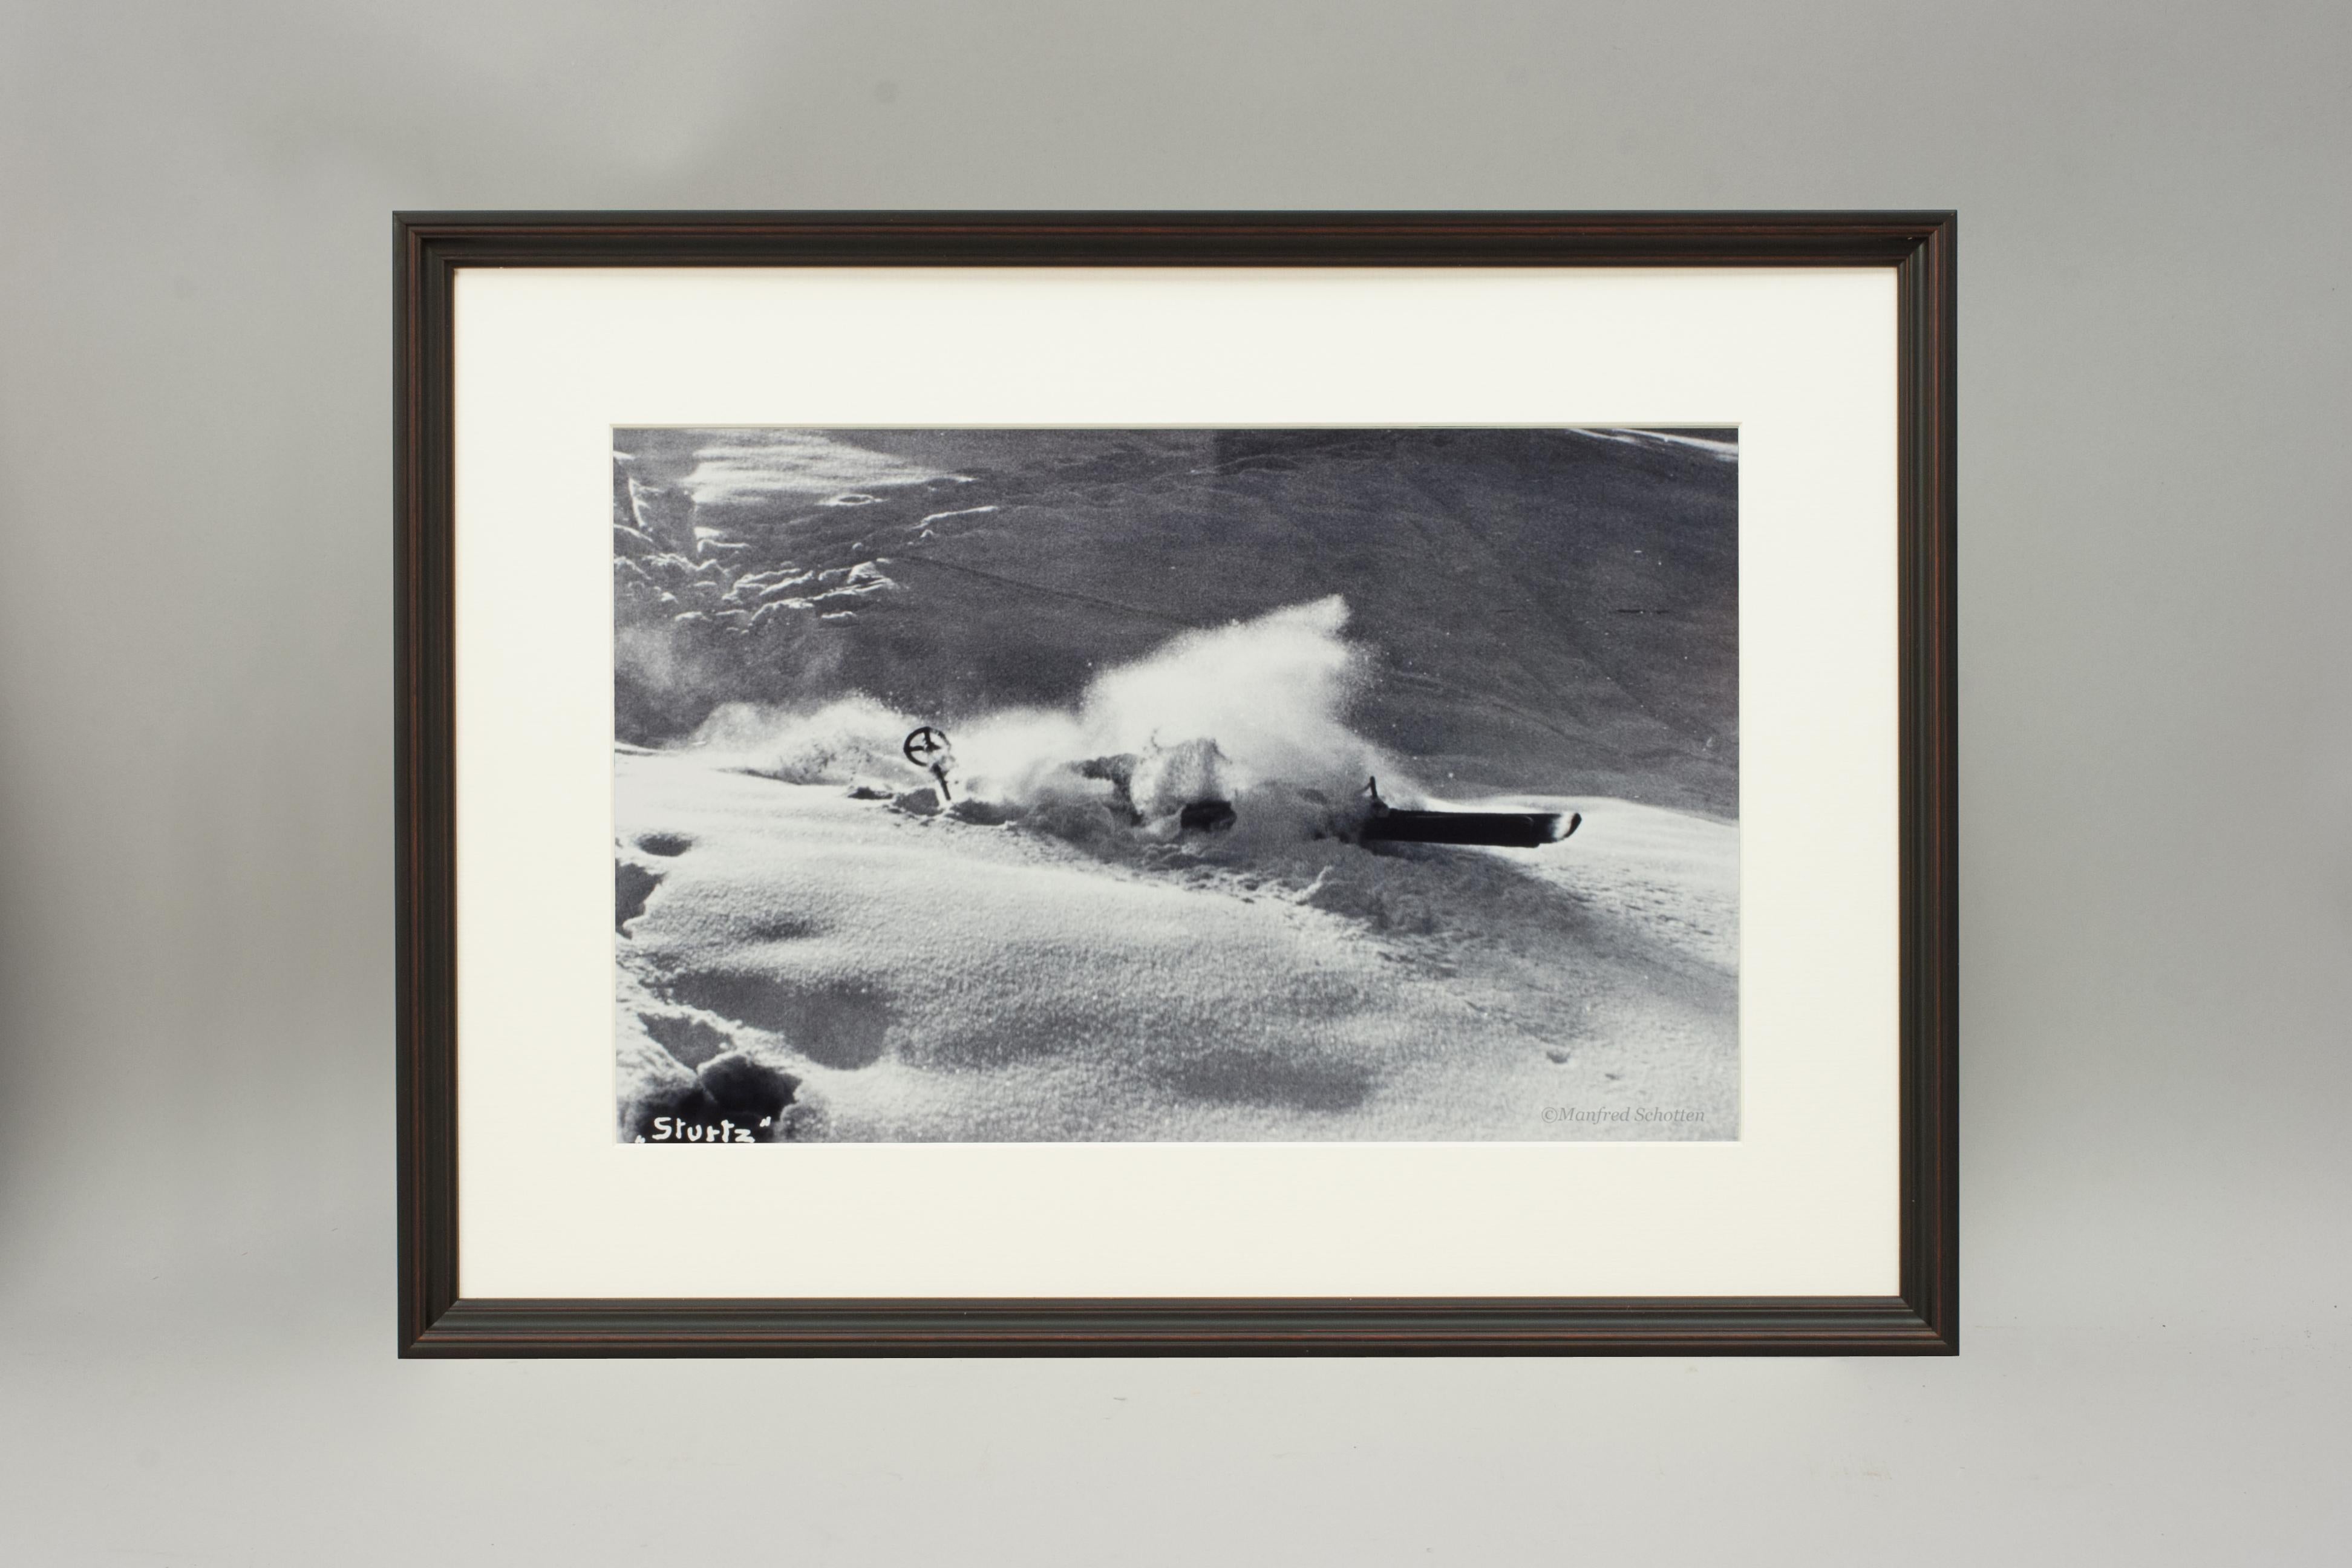 'NOSE DIVE', a modern framed and mounted black and white photograph after an original 1930's skiing photograph. The frame is black with a burgundy undercoat, the glazing is clarity+ premium synthetic glass. Black & white alpine photos are the